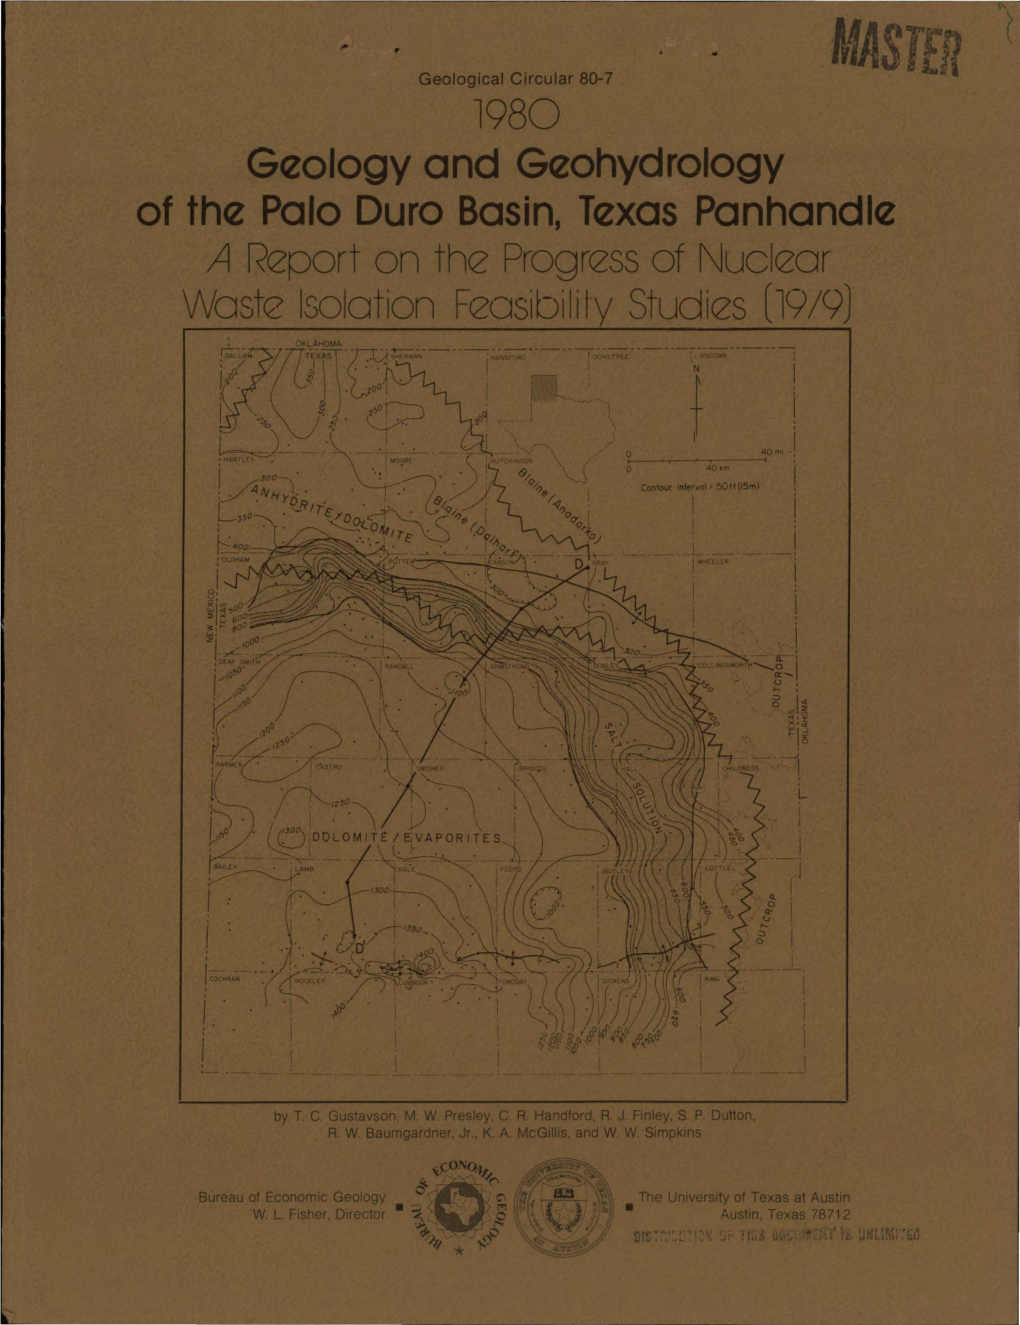 Geology and Geohydrology of the Palo Duro Basin, Texas Panhandle a Report on the Progress of Nuclear Waste Isolation Feasibilily Studies (L9/9]